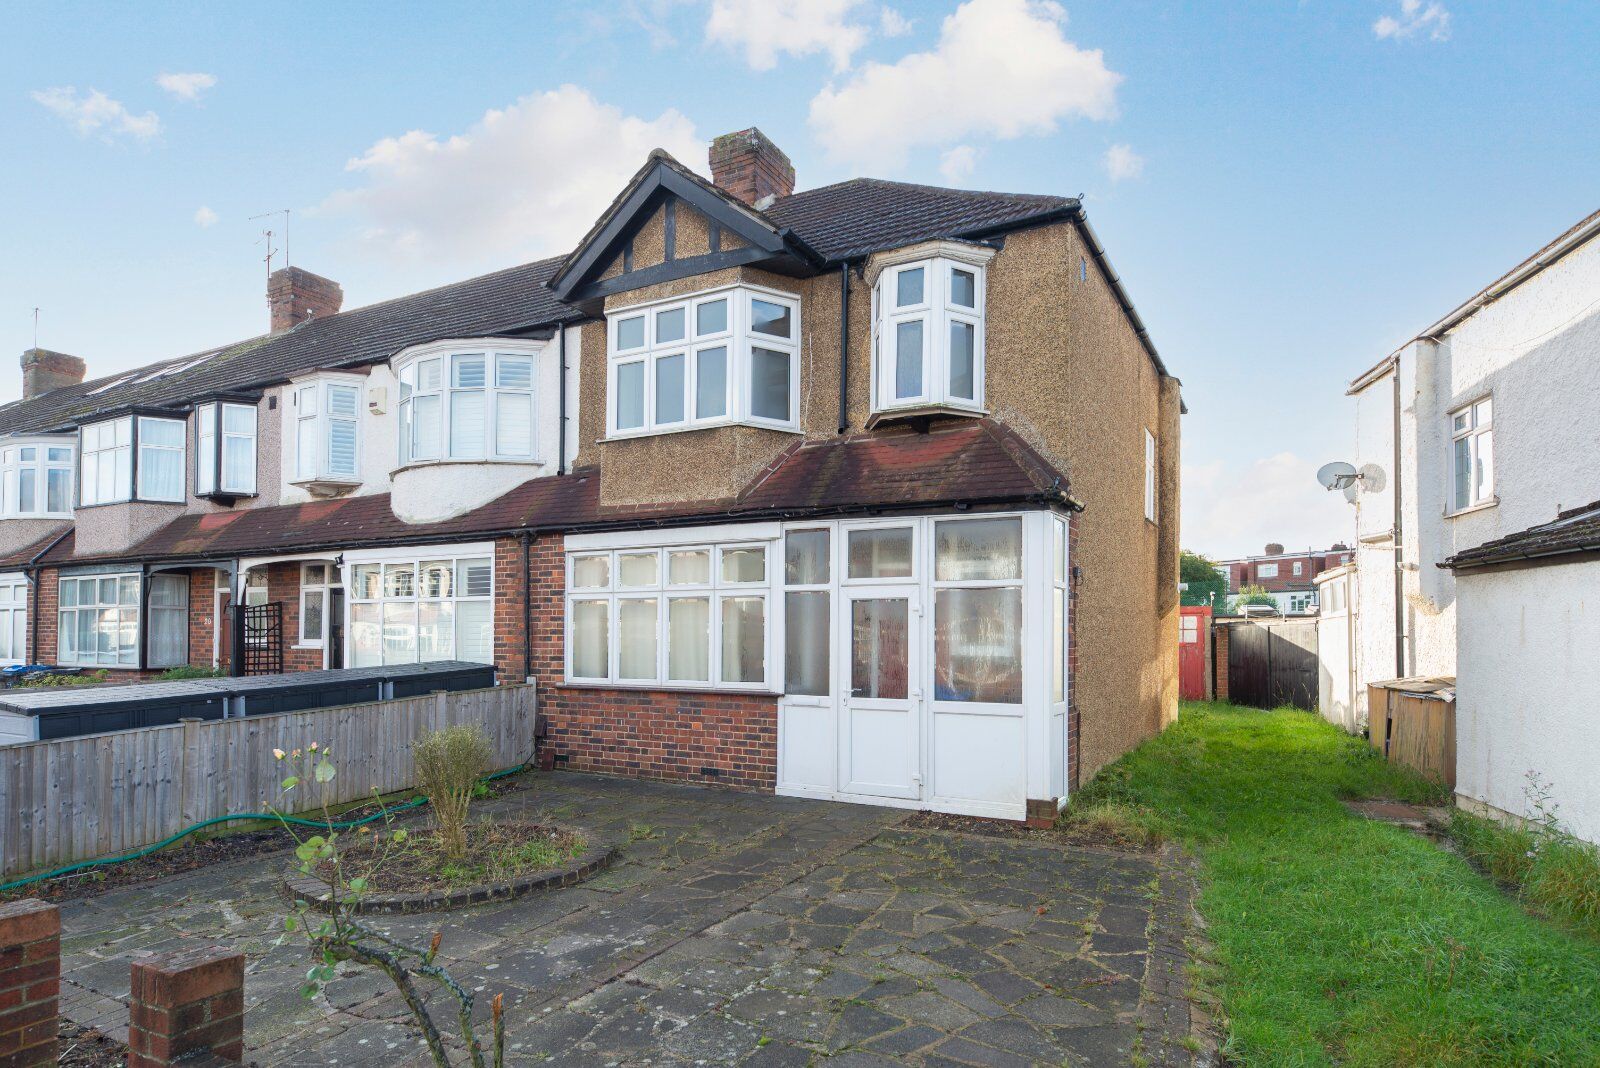 3 bedroom end terraced house for sale Crossway, London, SW20, main image